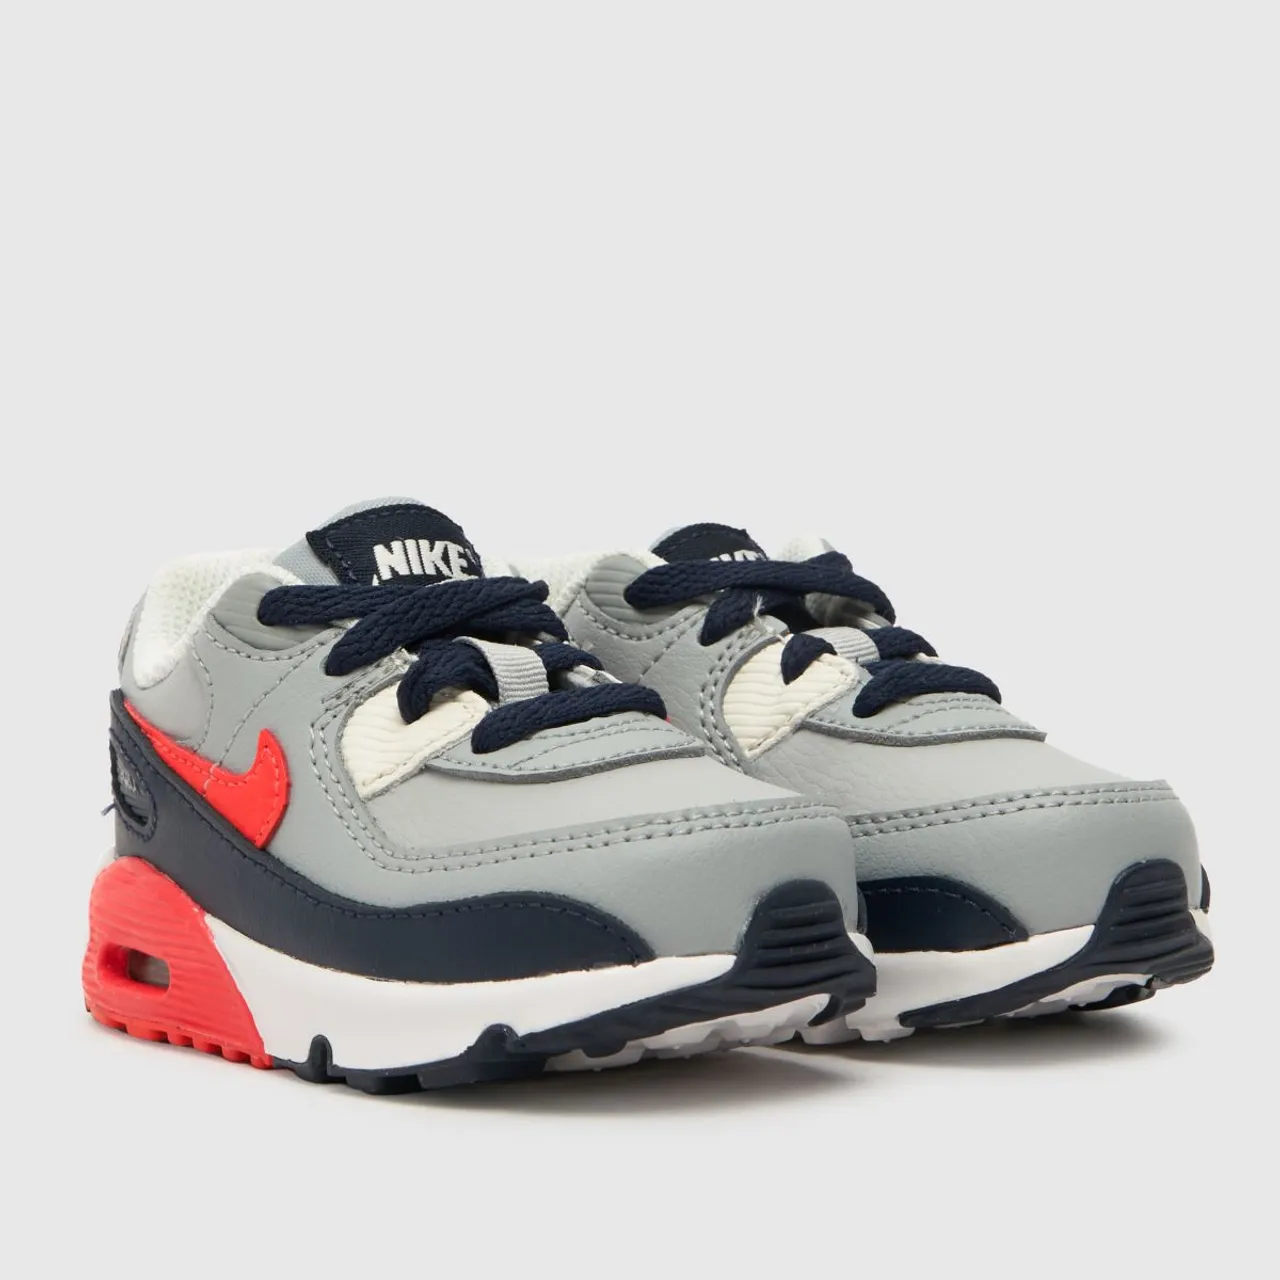 Nike Navy & Grey Air Max 90 Boys Toddler Trainers